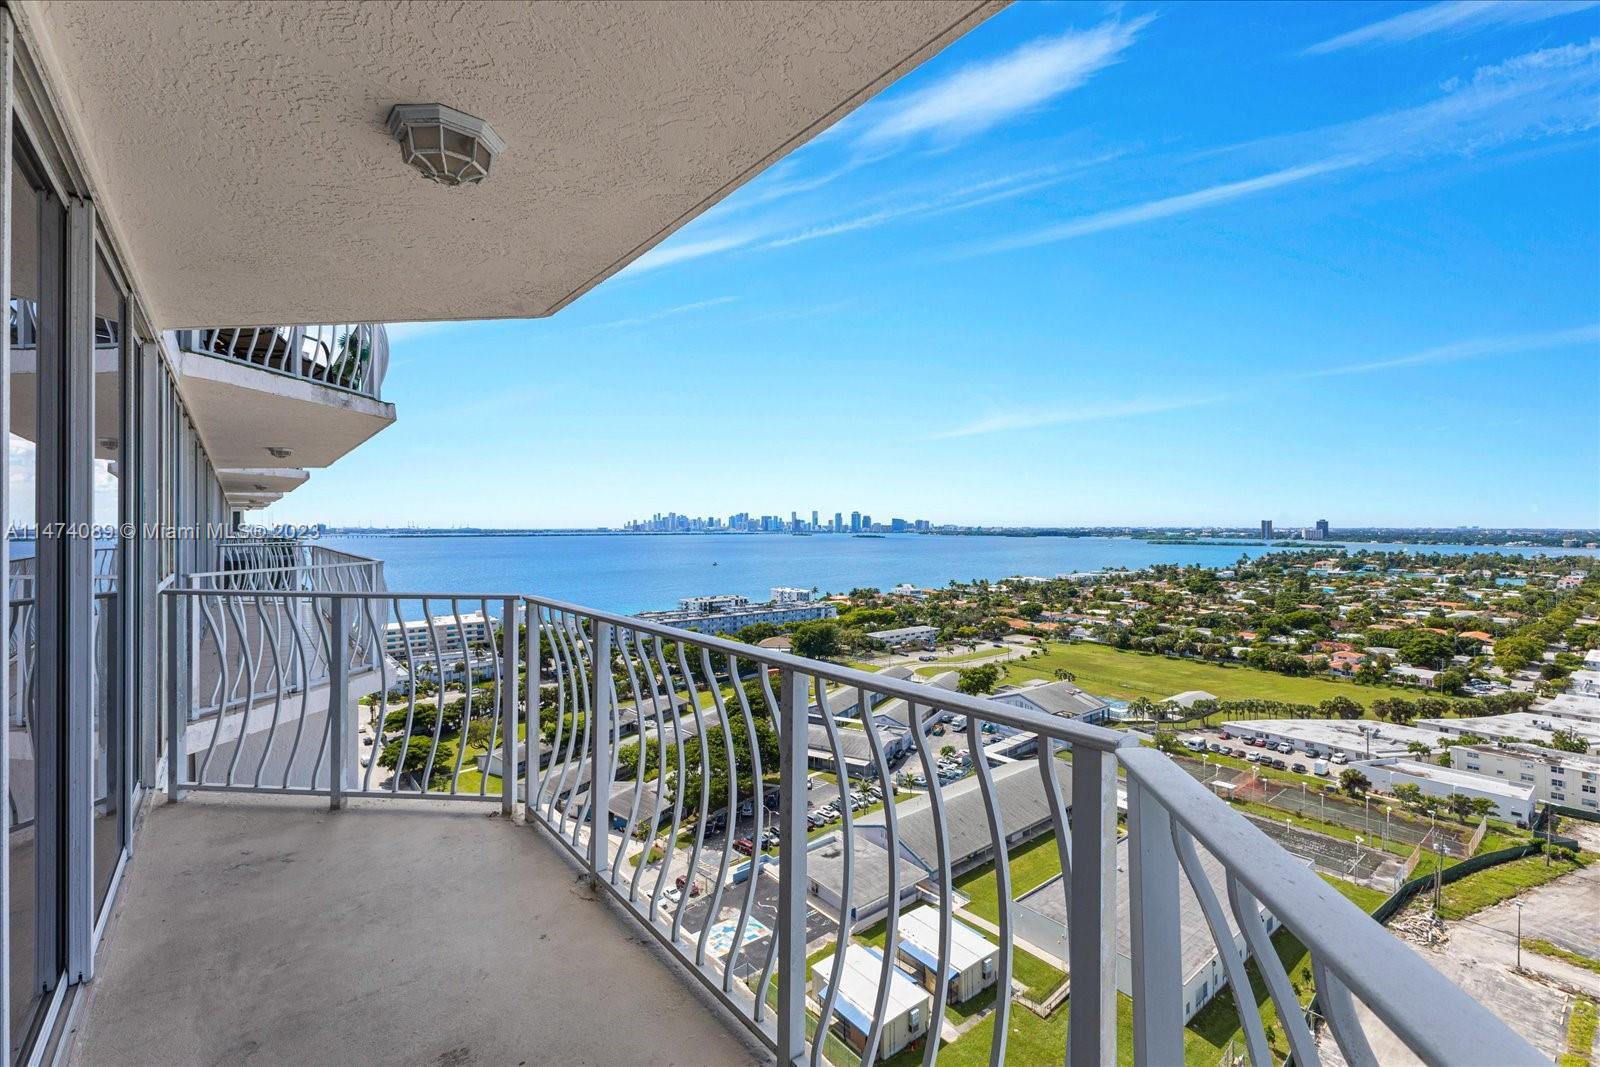 West-facing bay and Miami skyline views with unforgettable sunsets. This spacious, well-maintained 2